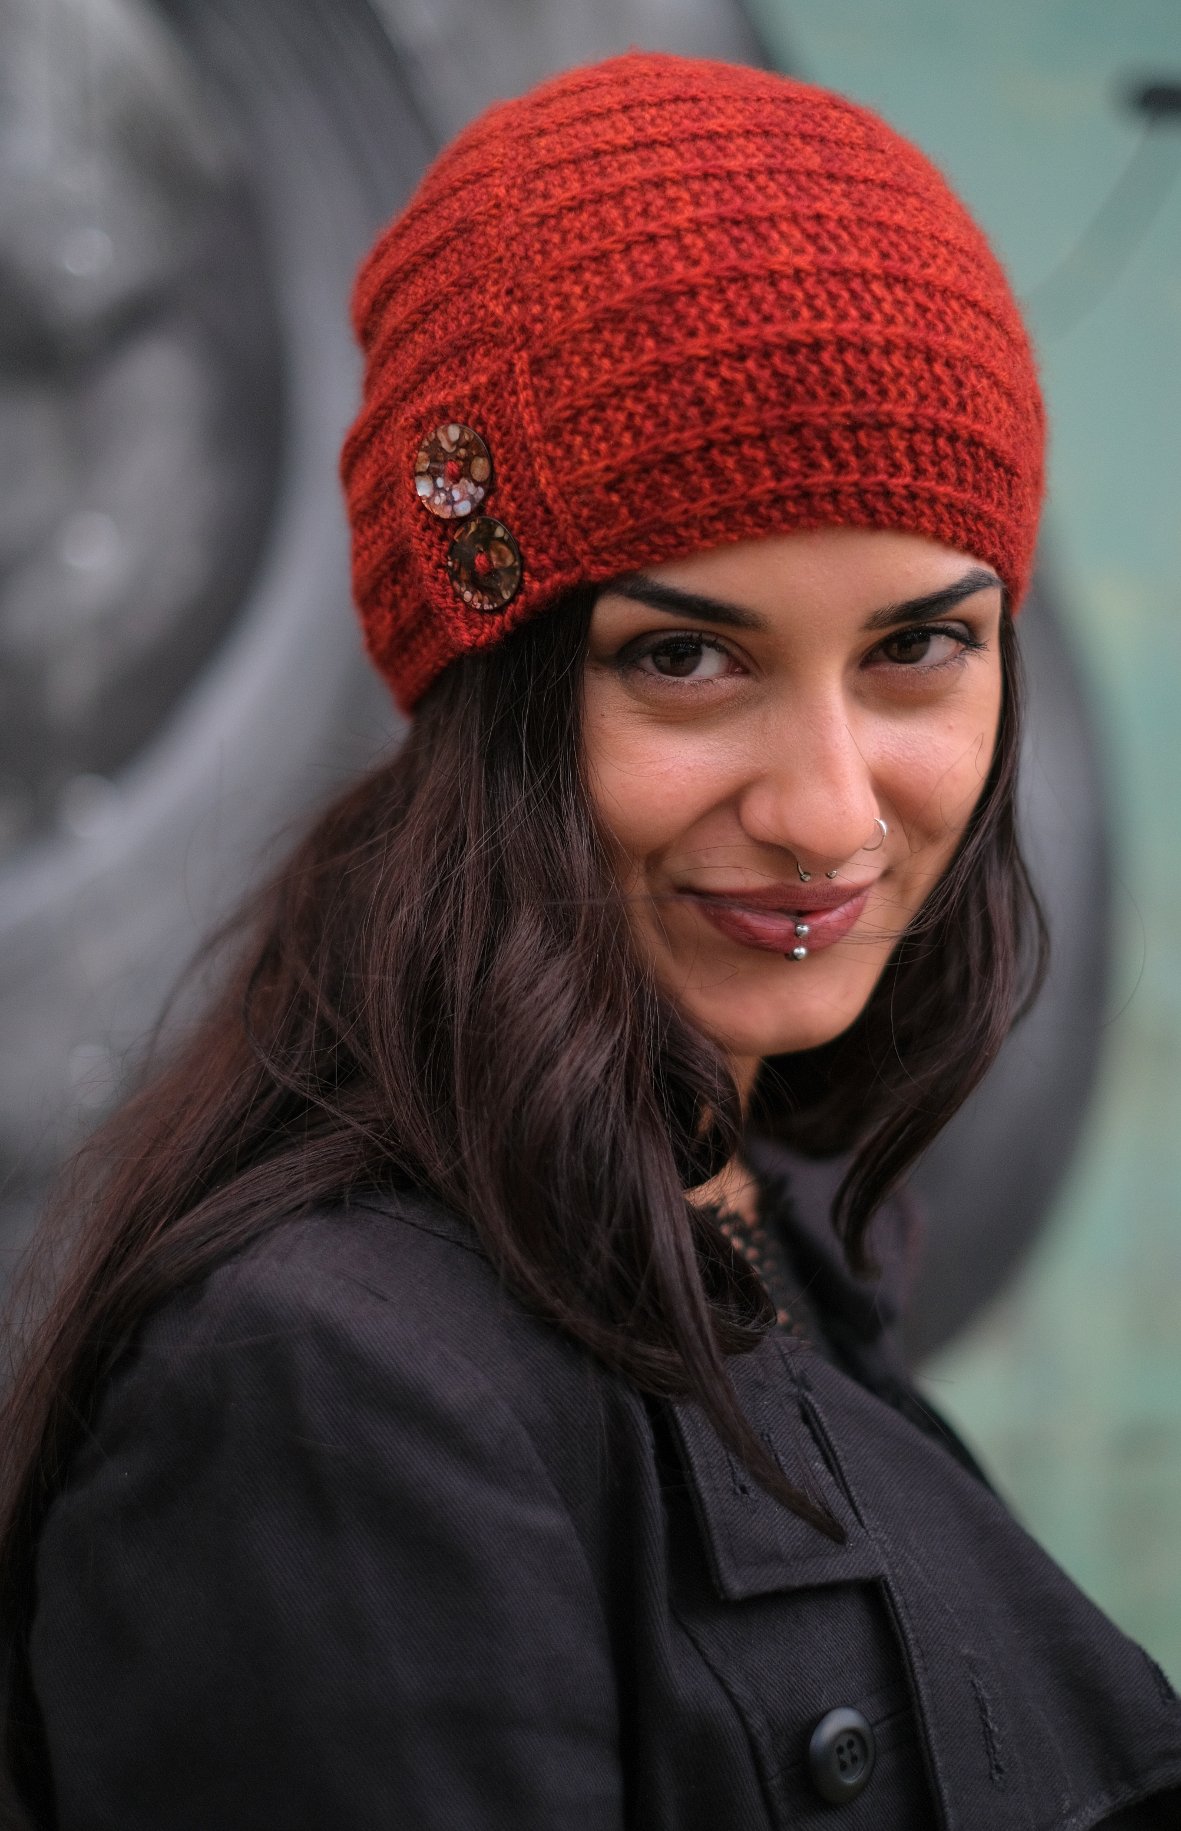 Hat knitting patterns for worsted and aran weight yarn — Woolly Wormhead